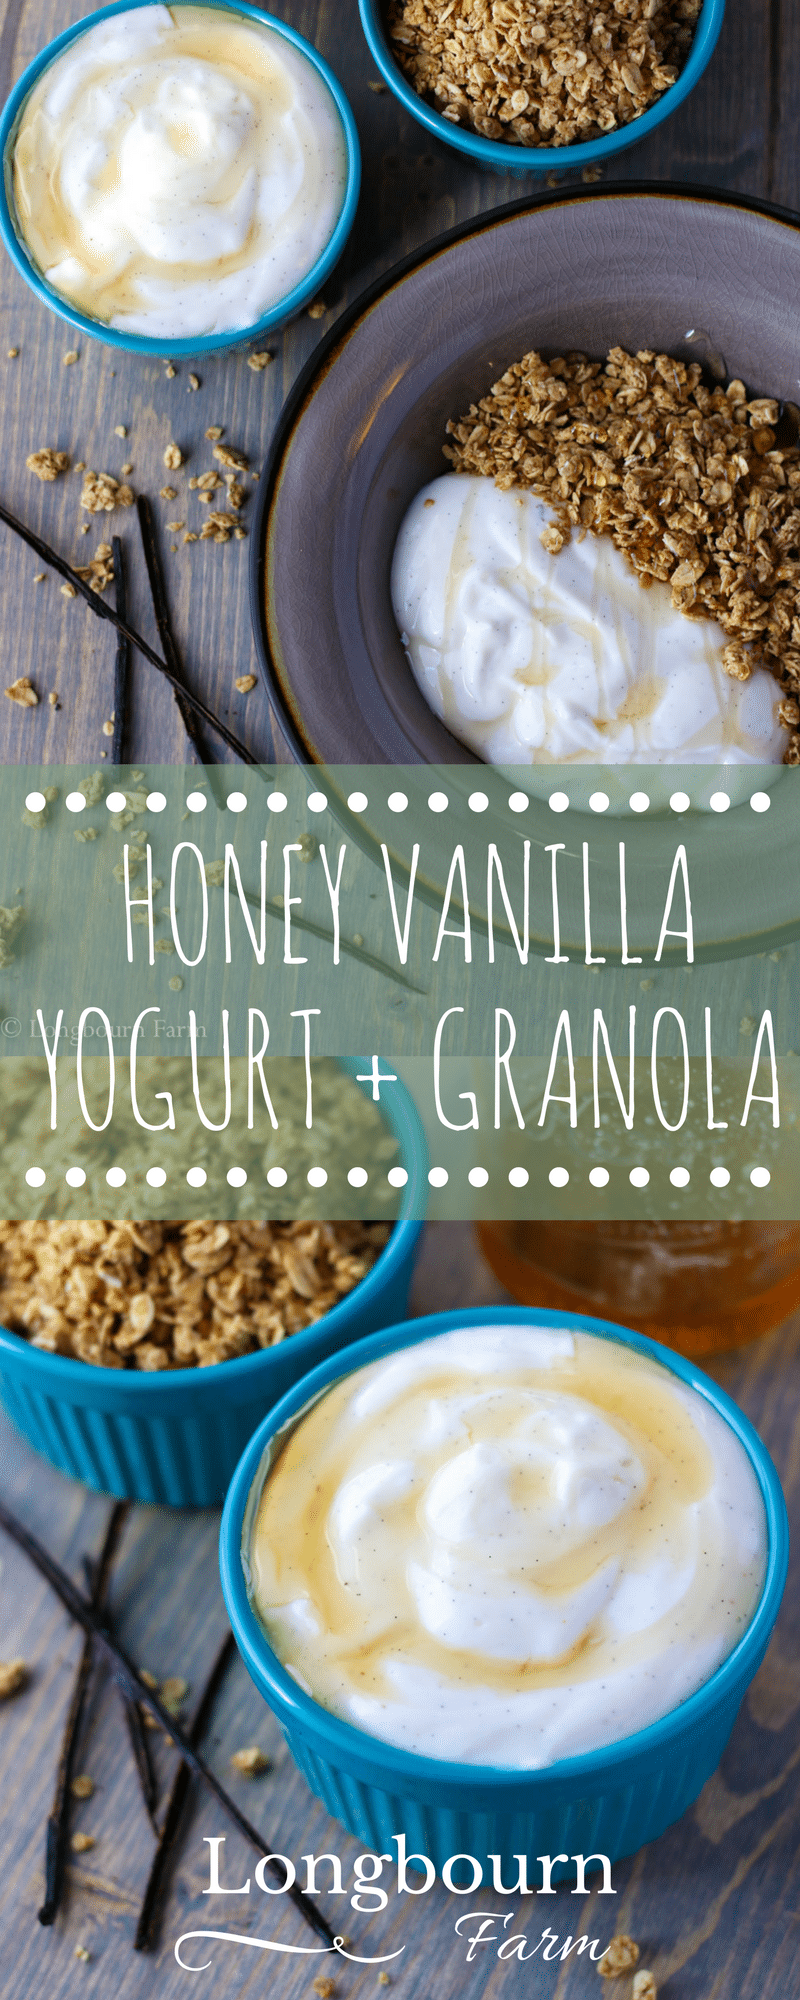 Honey vanilla yogurt is an awesome quick breakfast idea. Buy plain yogurt and flavor it yourself to control sugar, flavor, and texture!